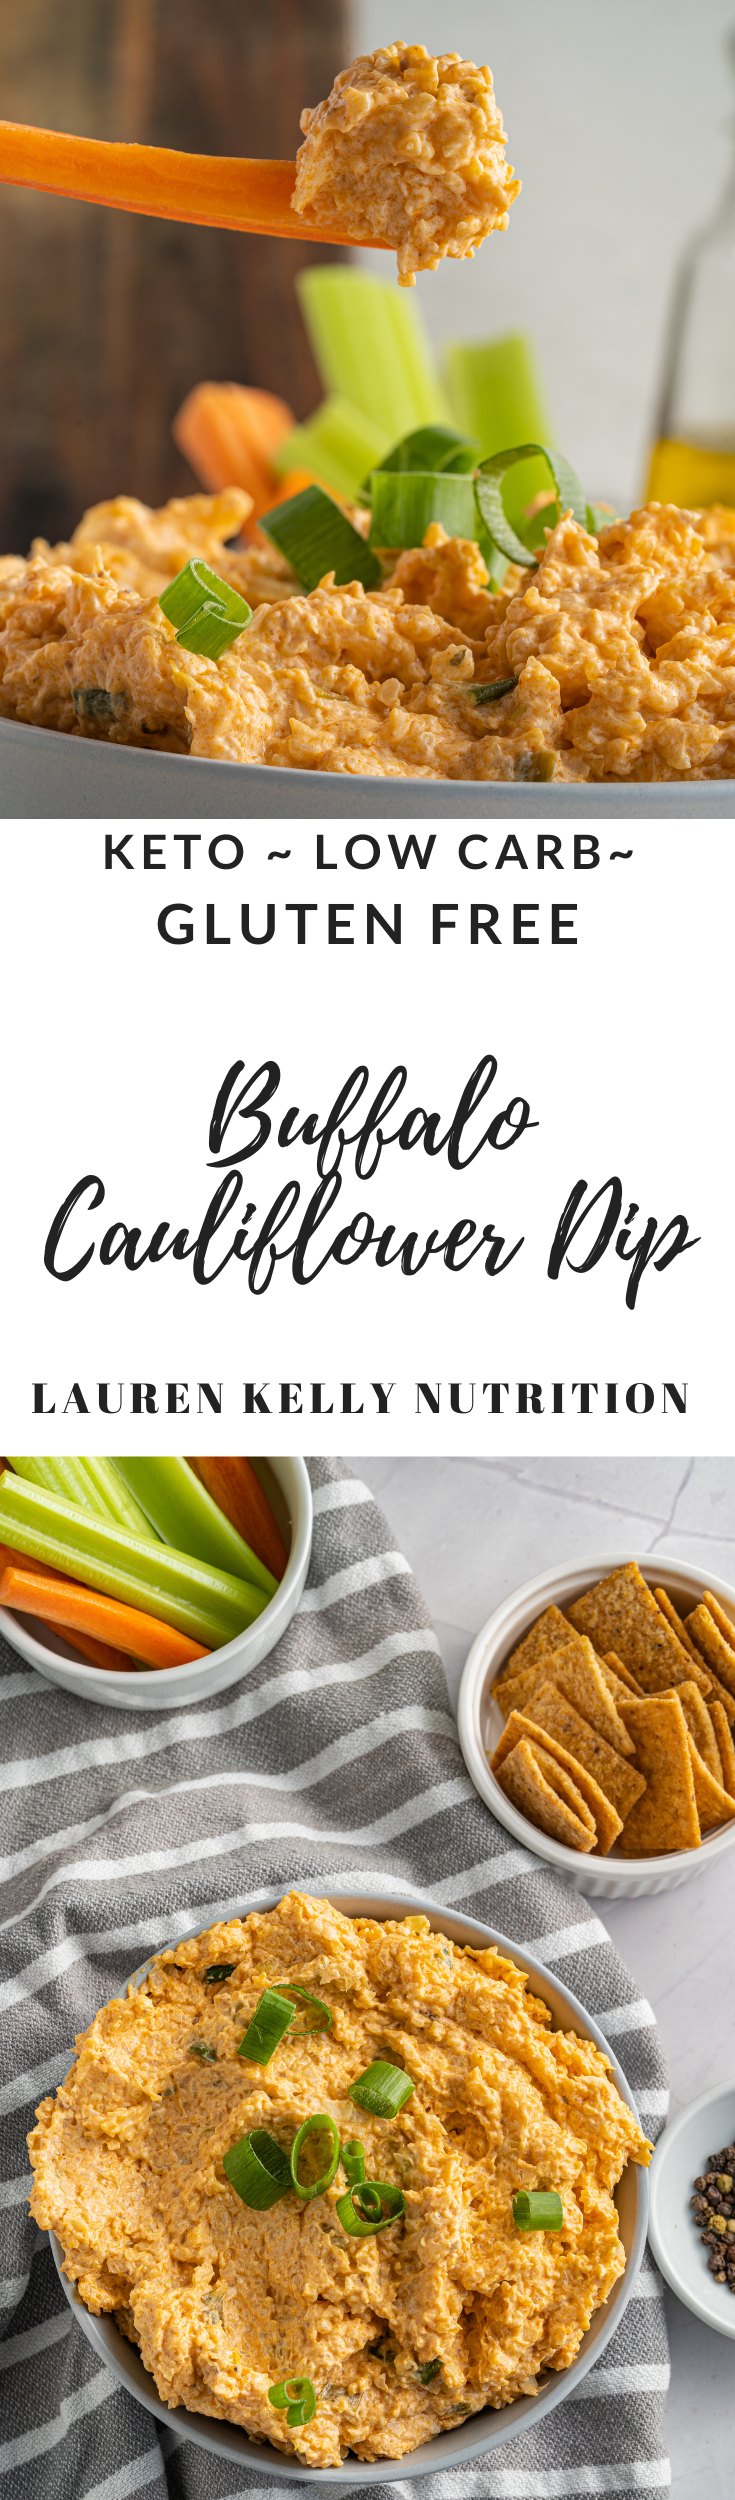 This Buffalo Cauliflower Dip is creamy, vegetarian, low carb, gluten free and delicious!